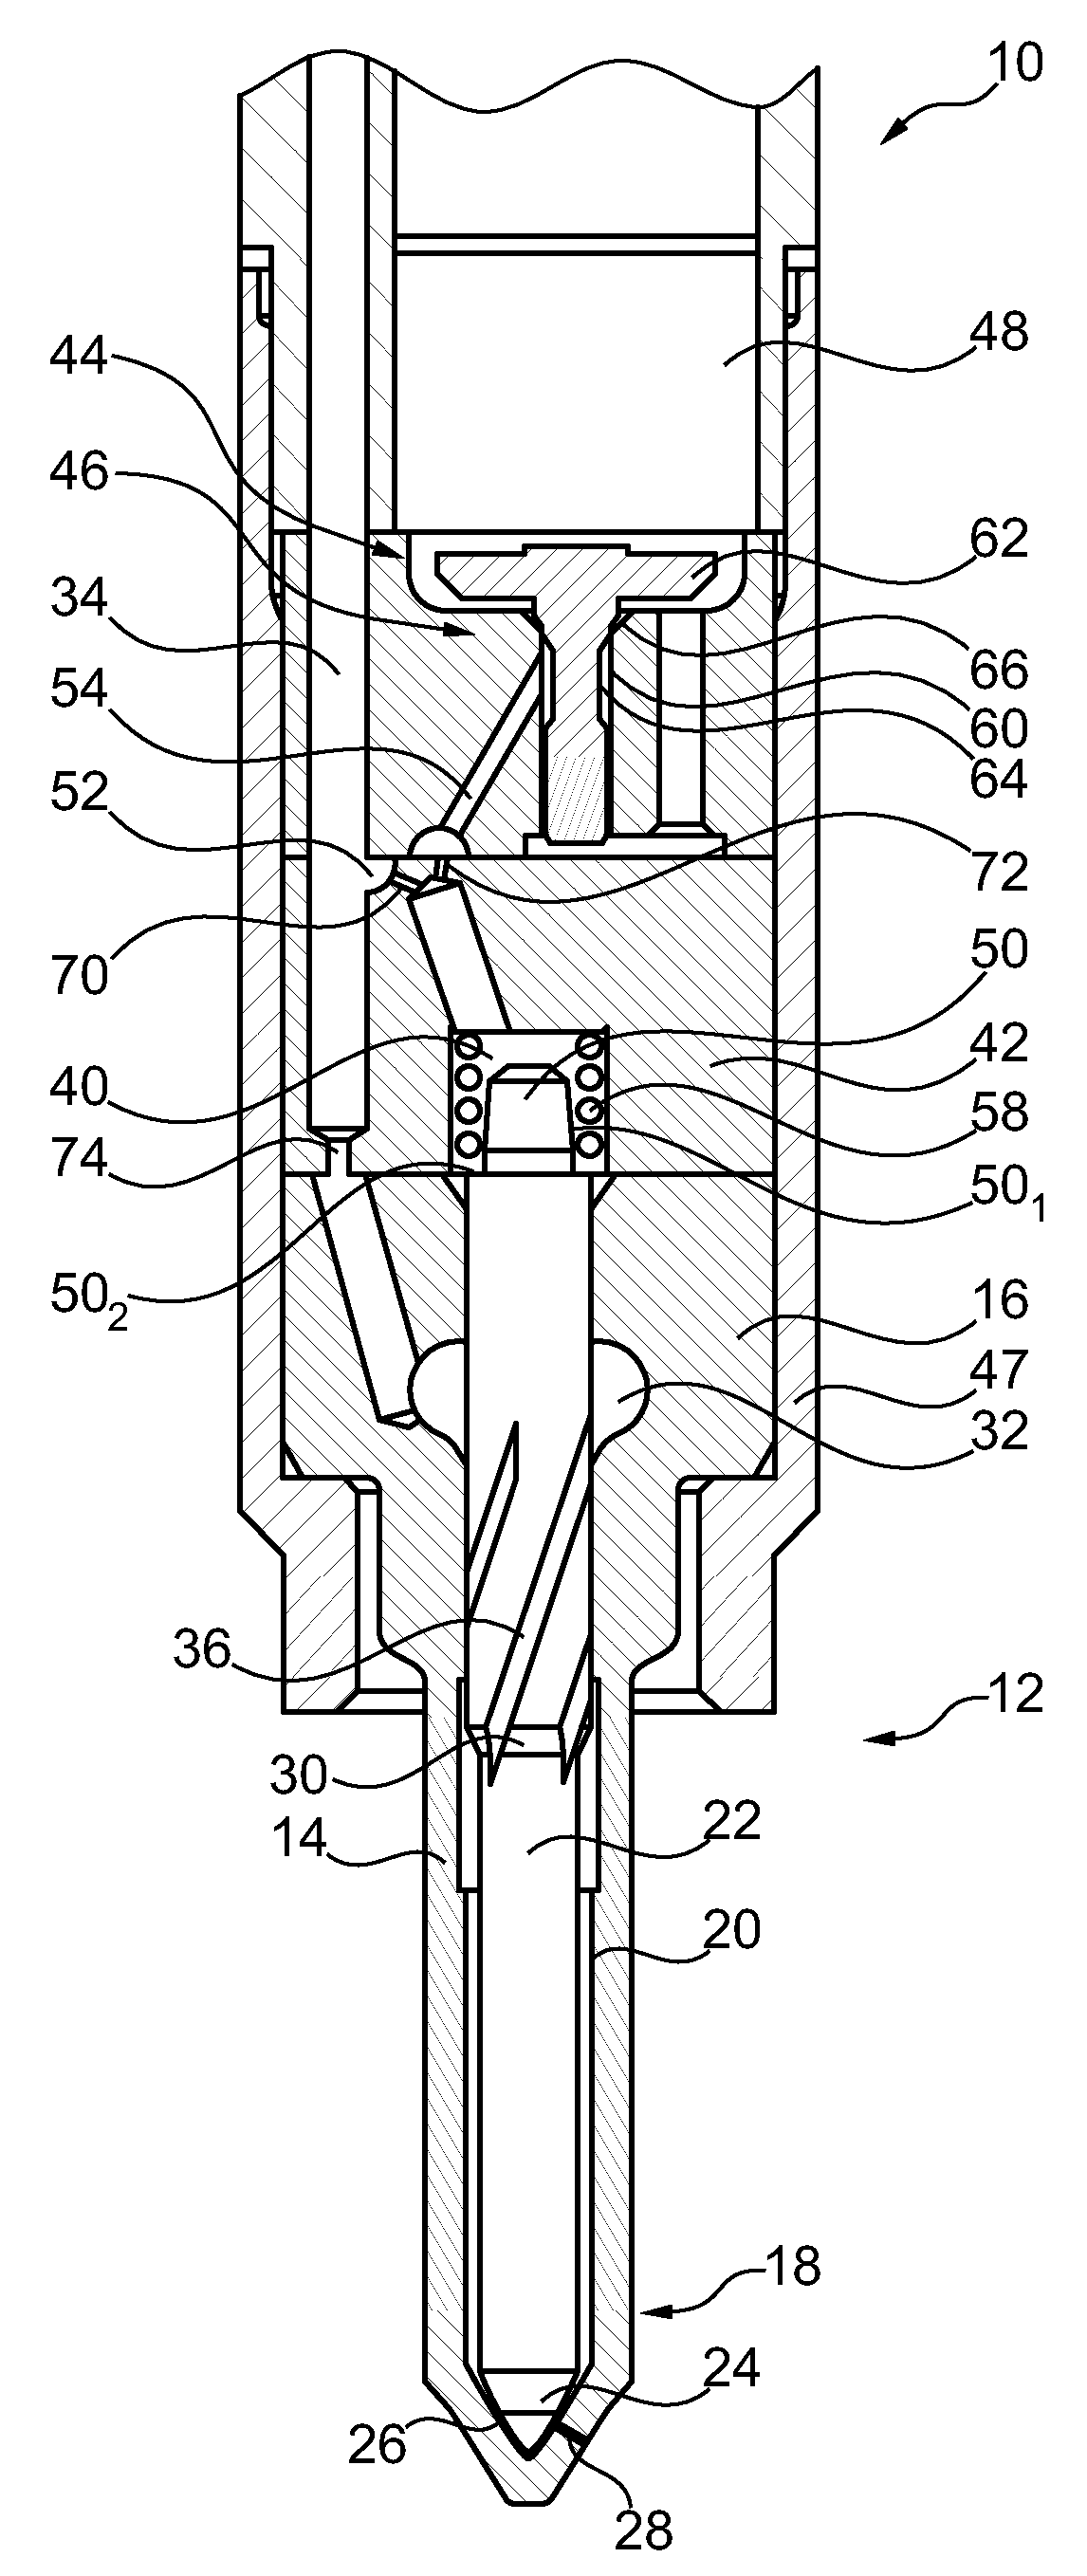 Fuel Injector for an Internal Combustion Engine